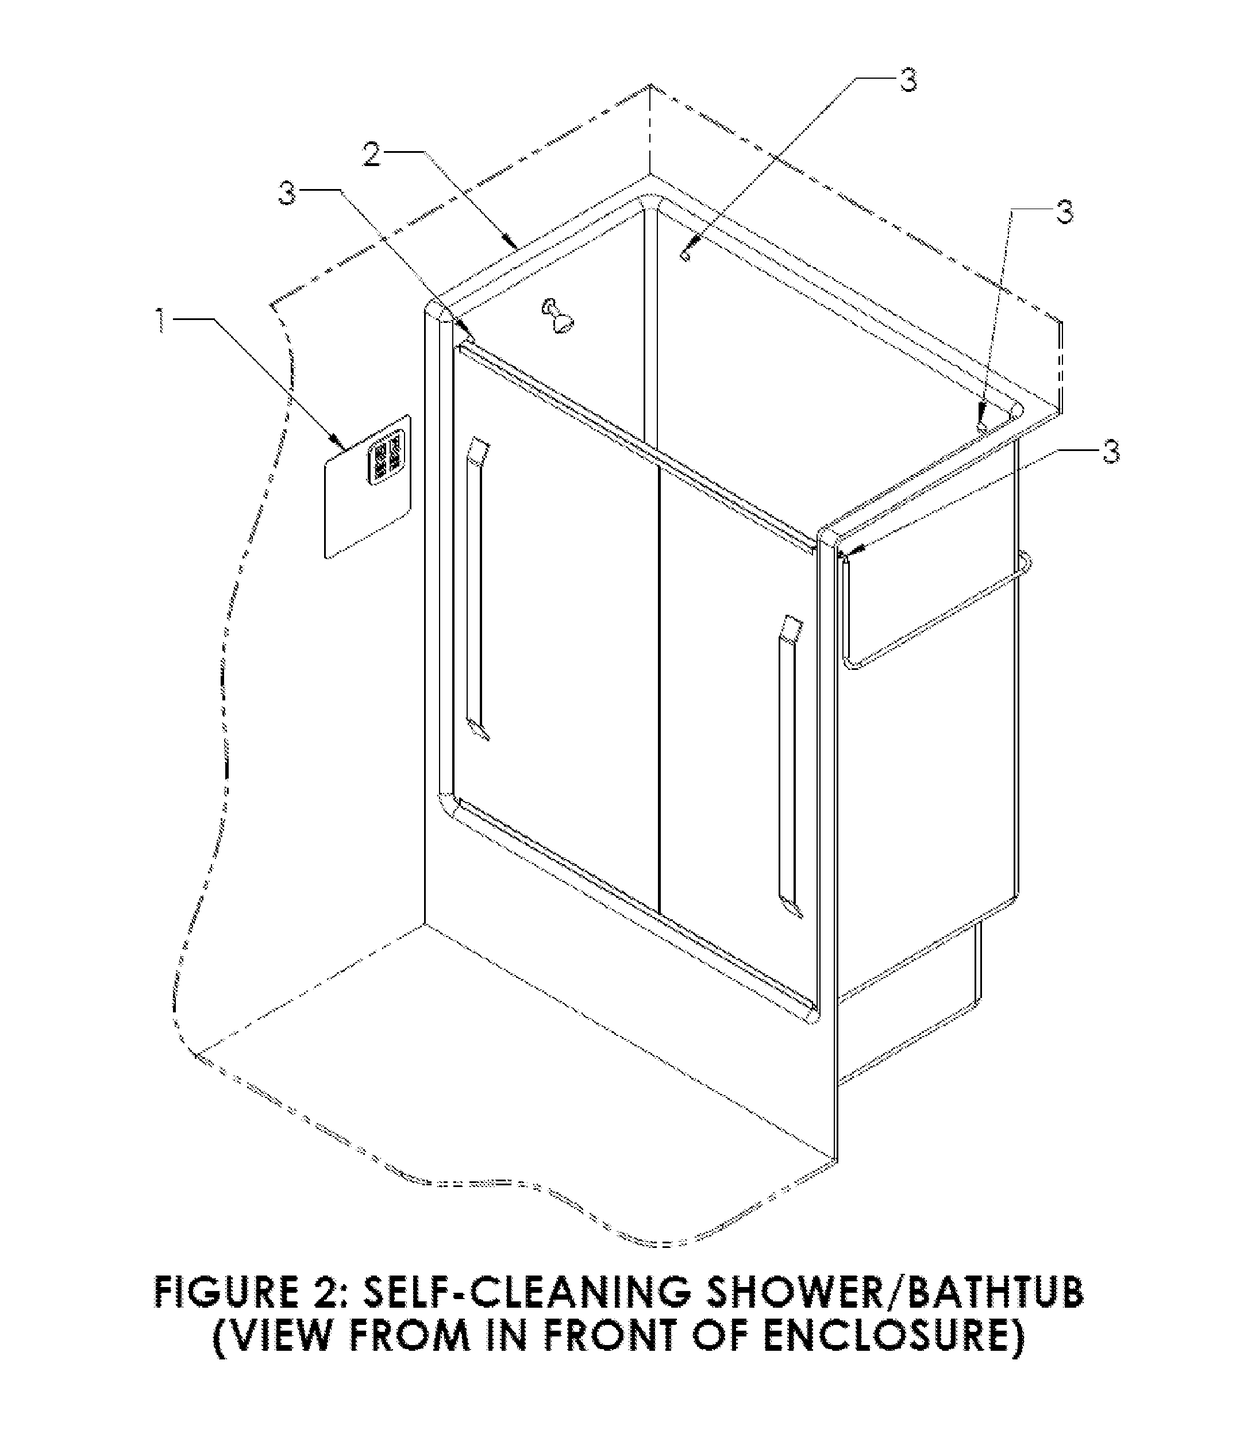 Devices to automate process for cleaning showers and bathtubs